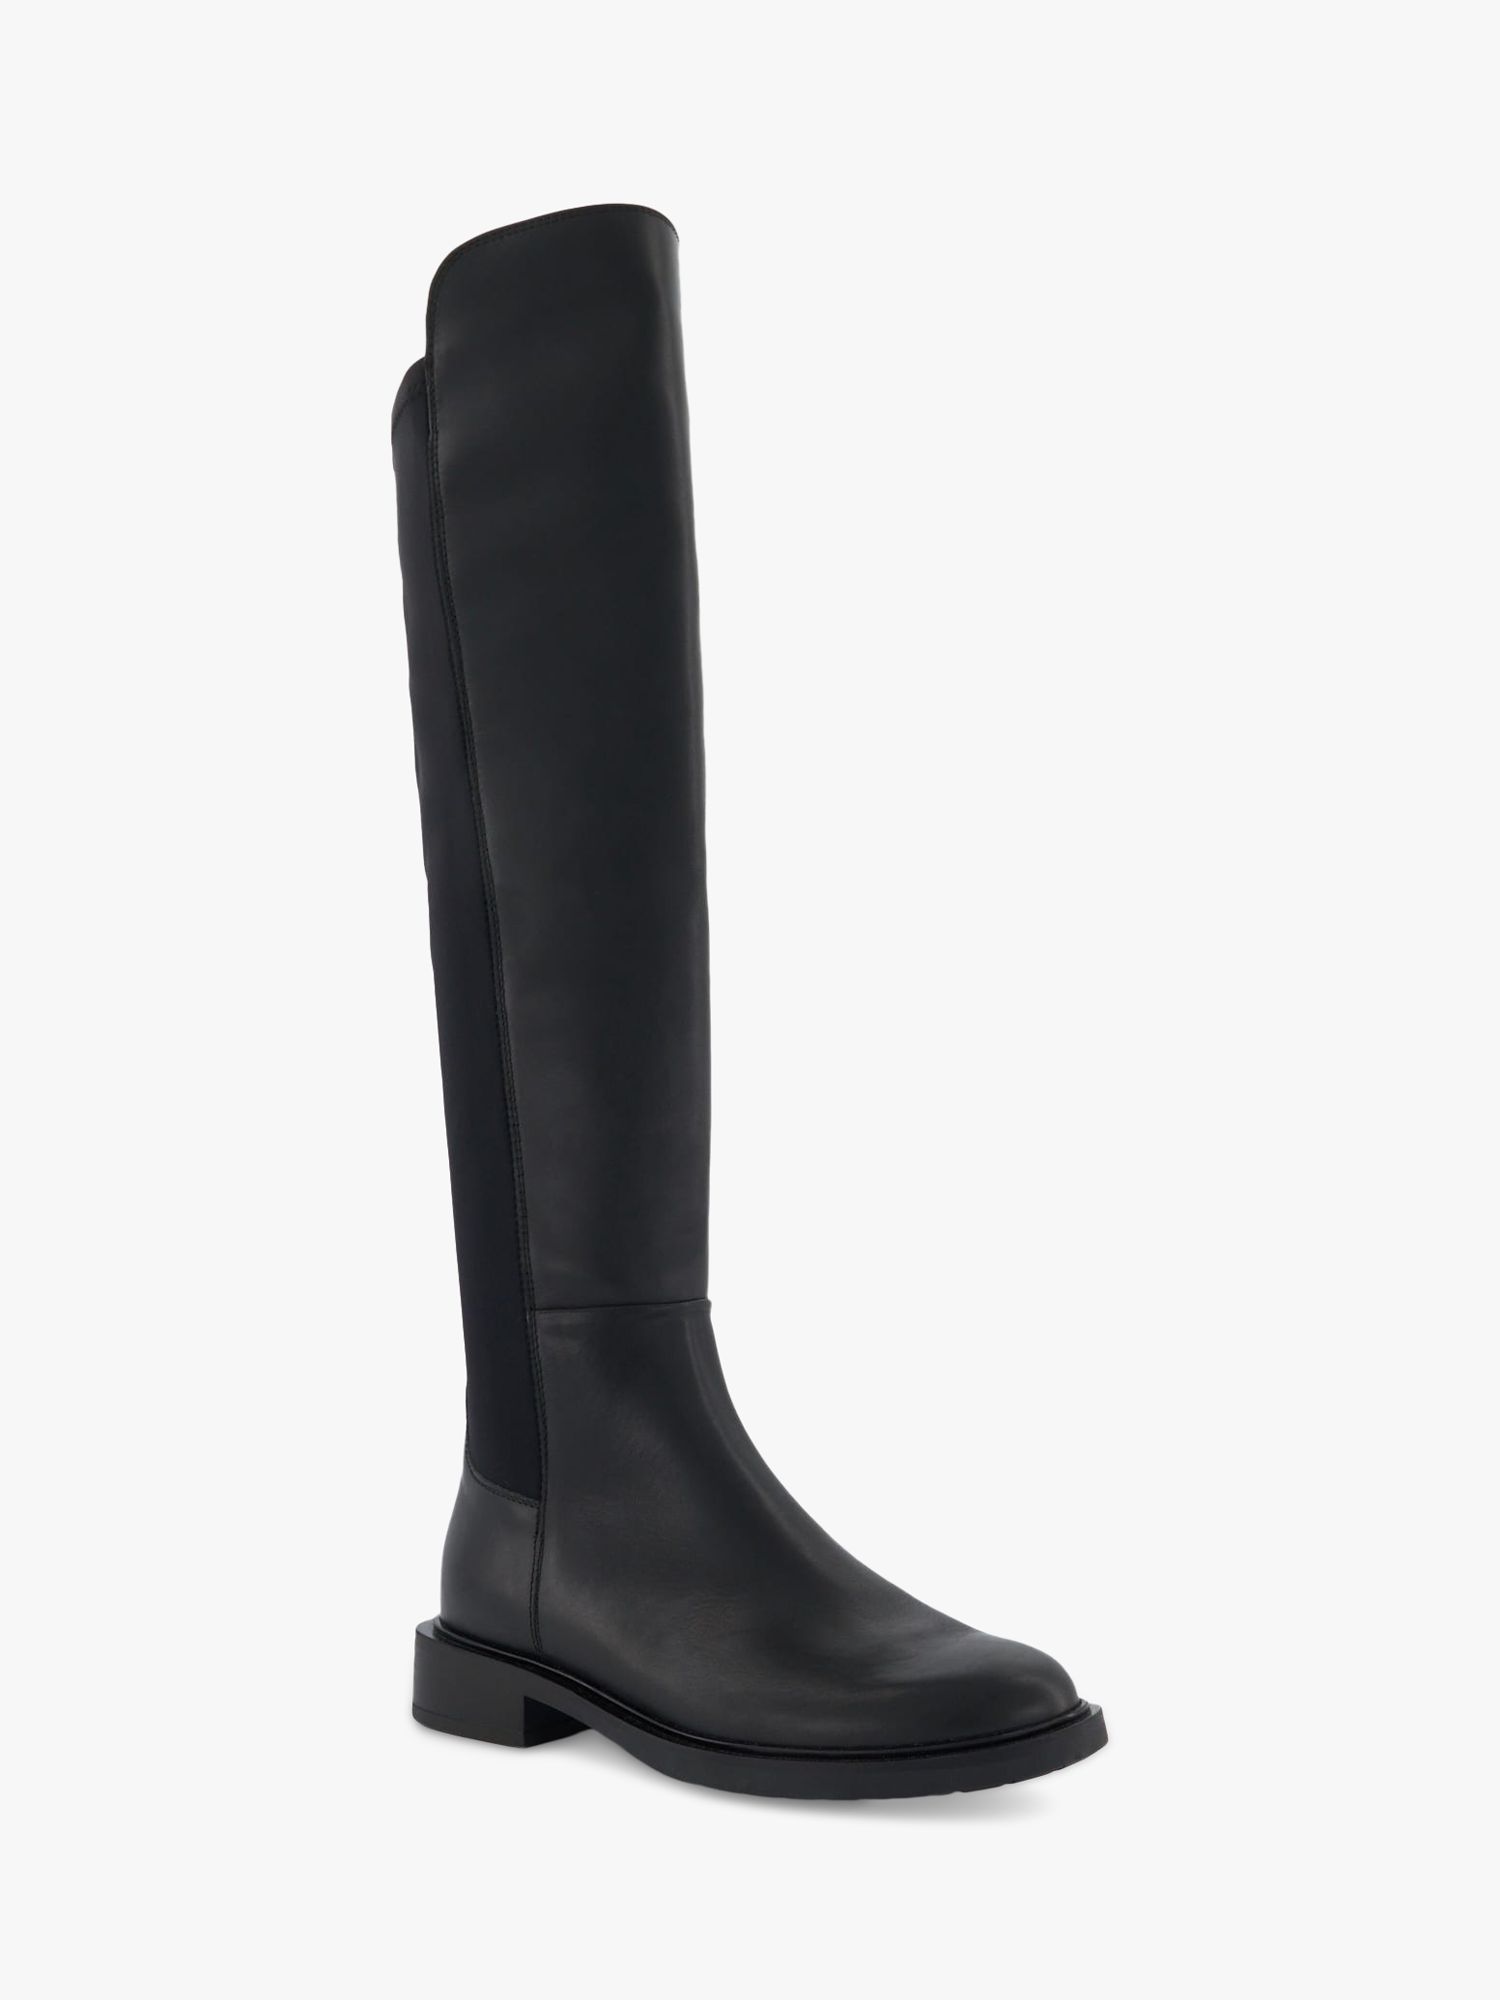 Dune Text Leather Knee High Boots, Black at John Lewis & Partners